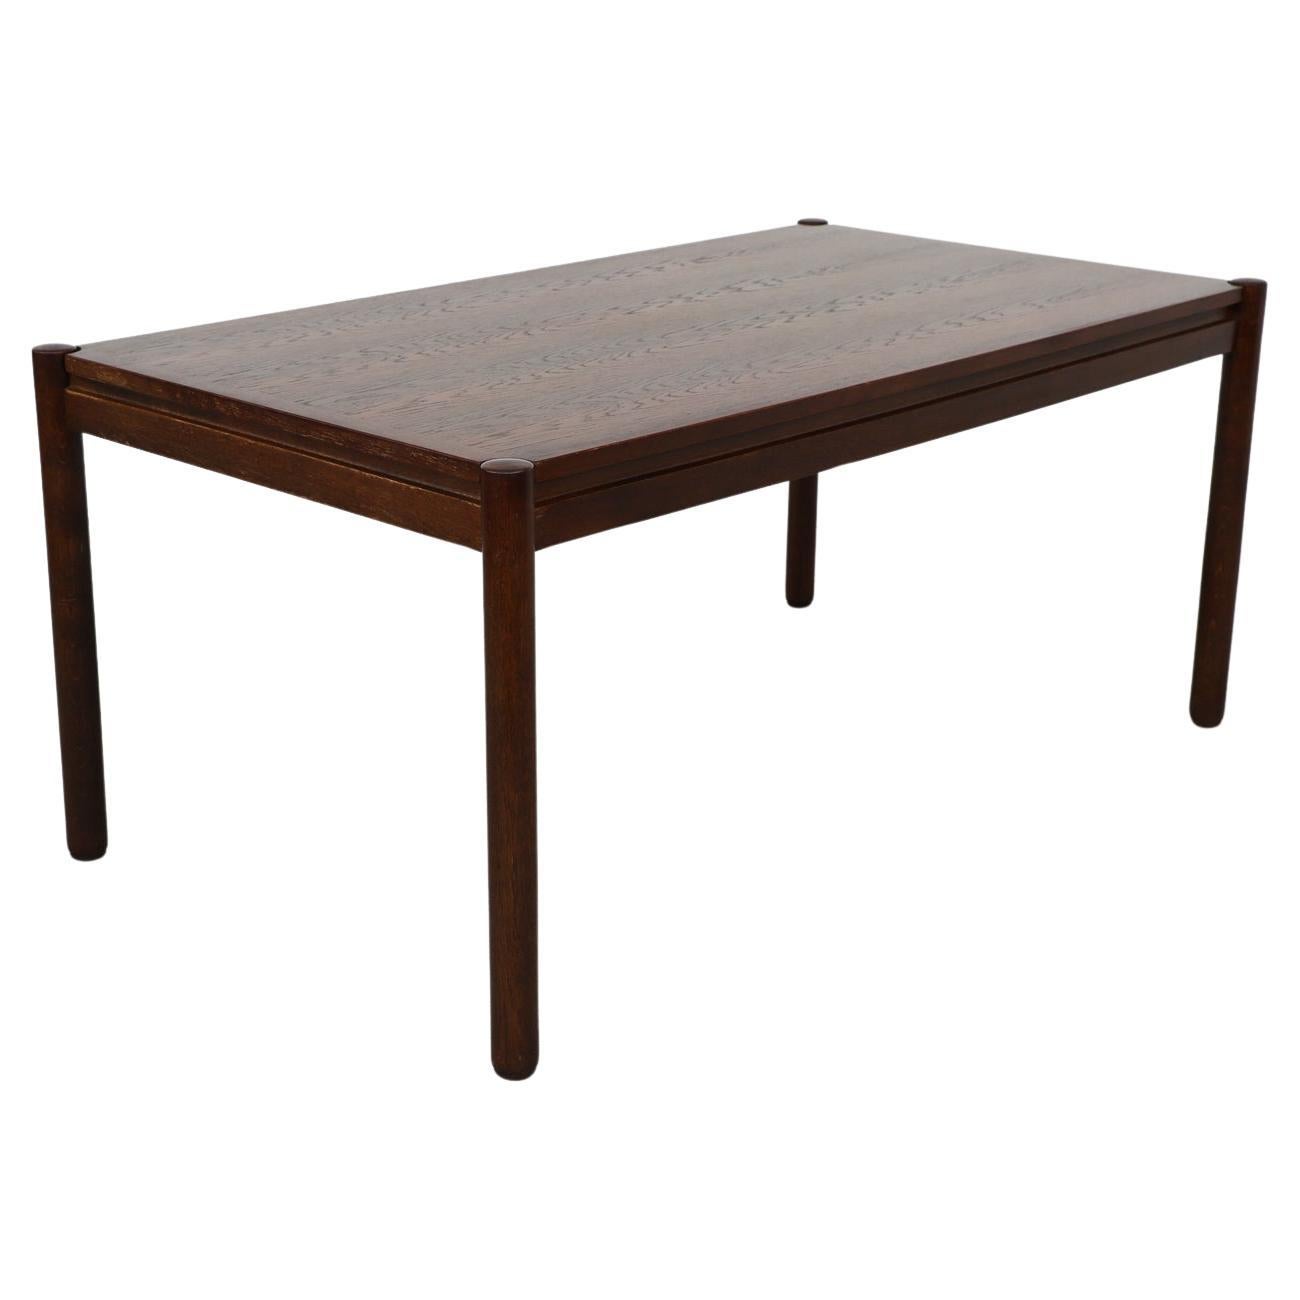 Vico Magistretti Style Dark Oak Dining Table with Rounded Legs